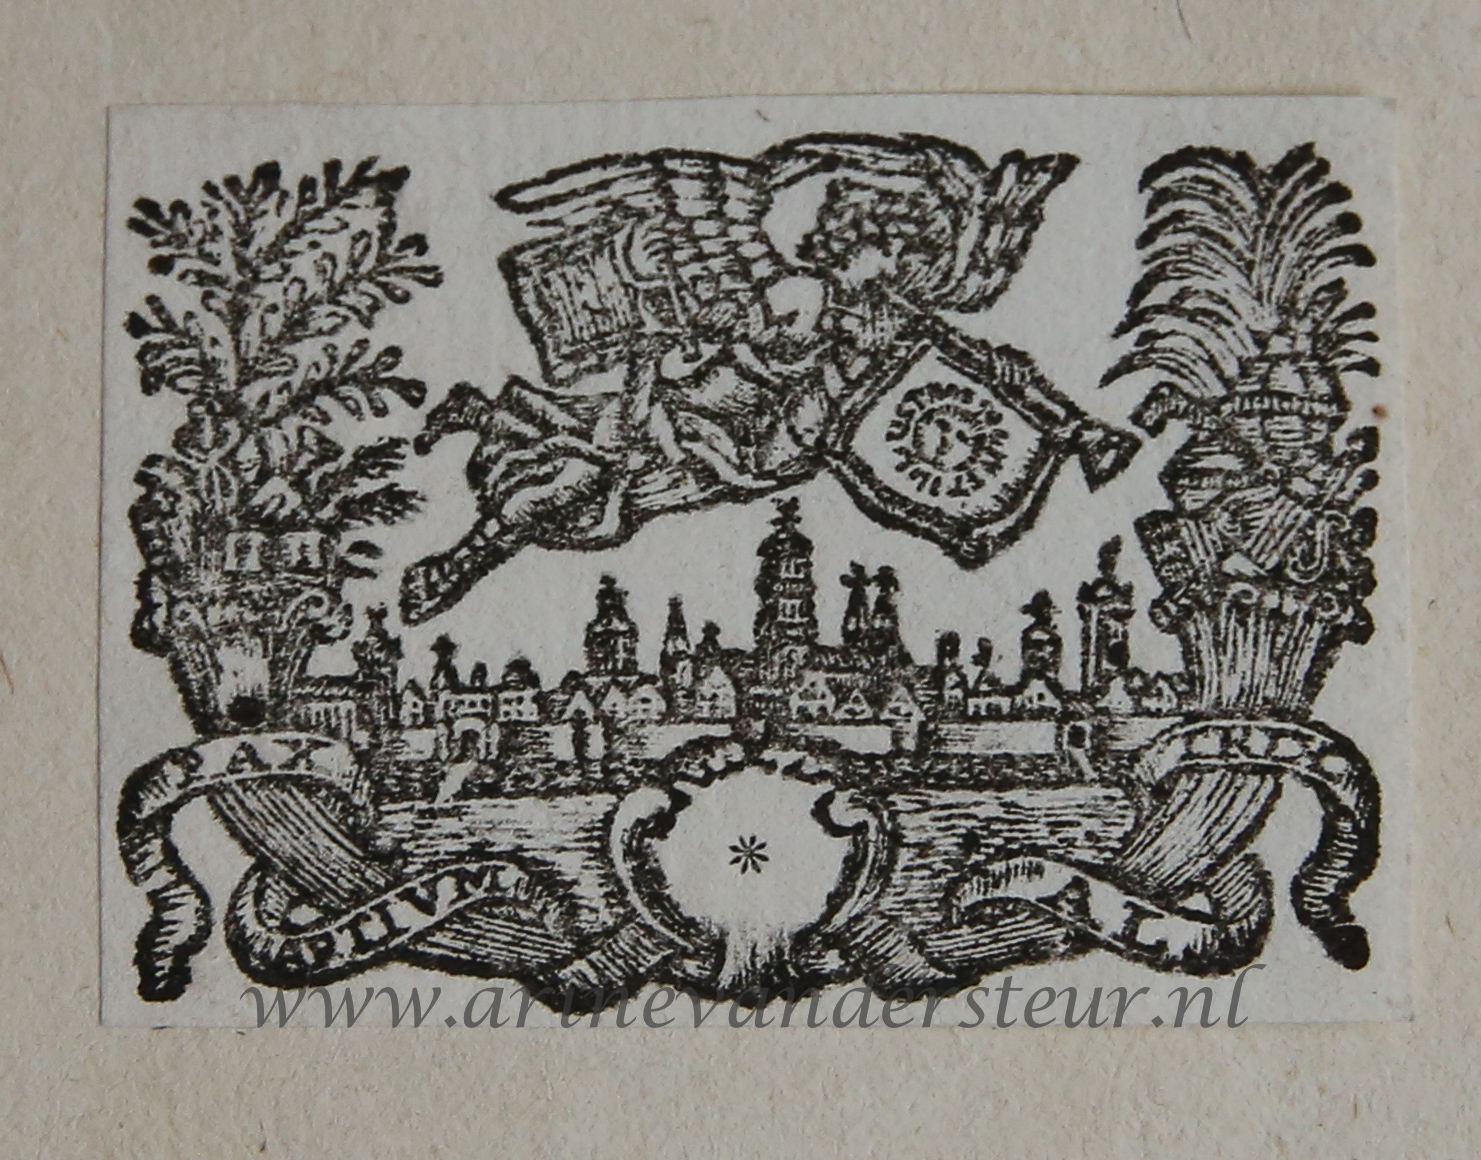 [Antique print, printer's device, woodcut] A flying Fama over the city of Utrecht, published ca. 1700, 1 p.